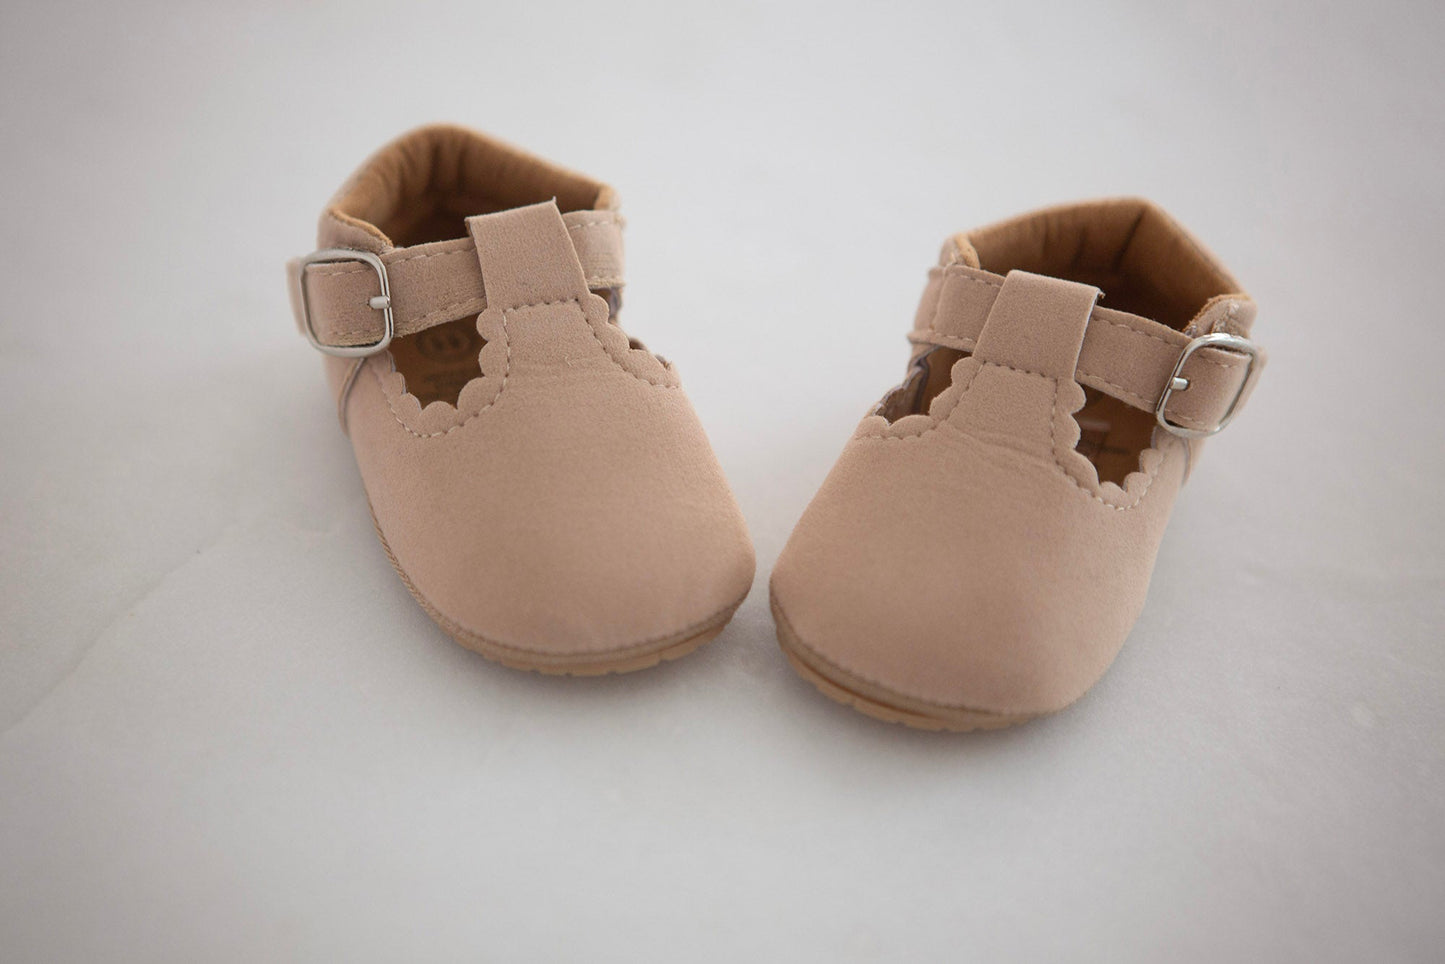 Baby Girl Shoes - Faux Suede Crib Shoes - Cheerful Lane